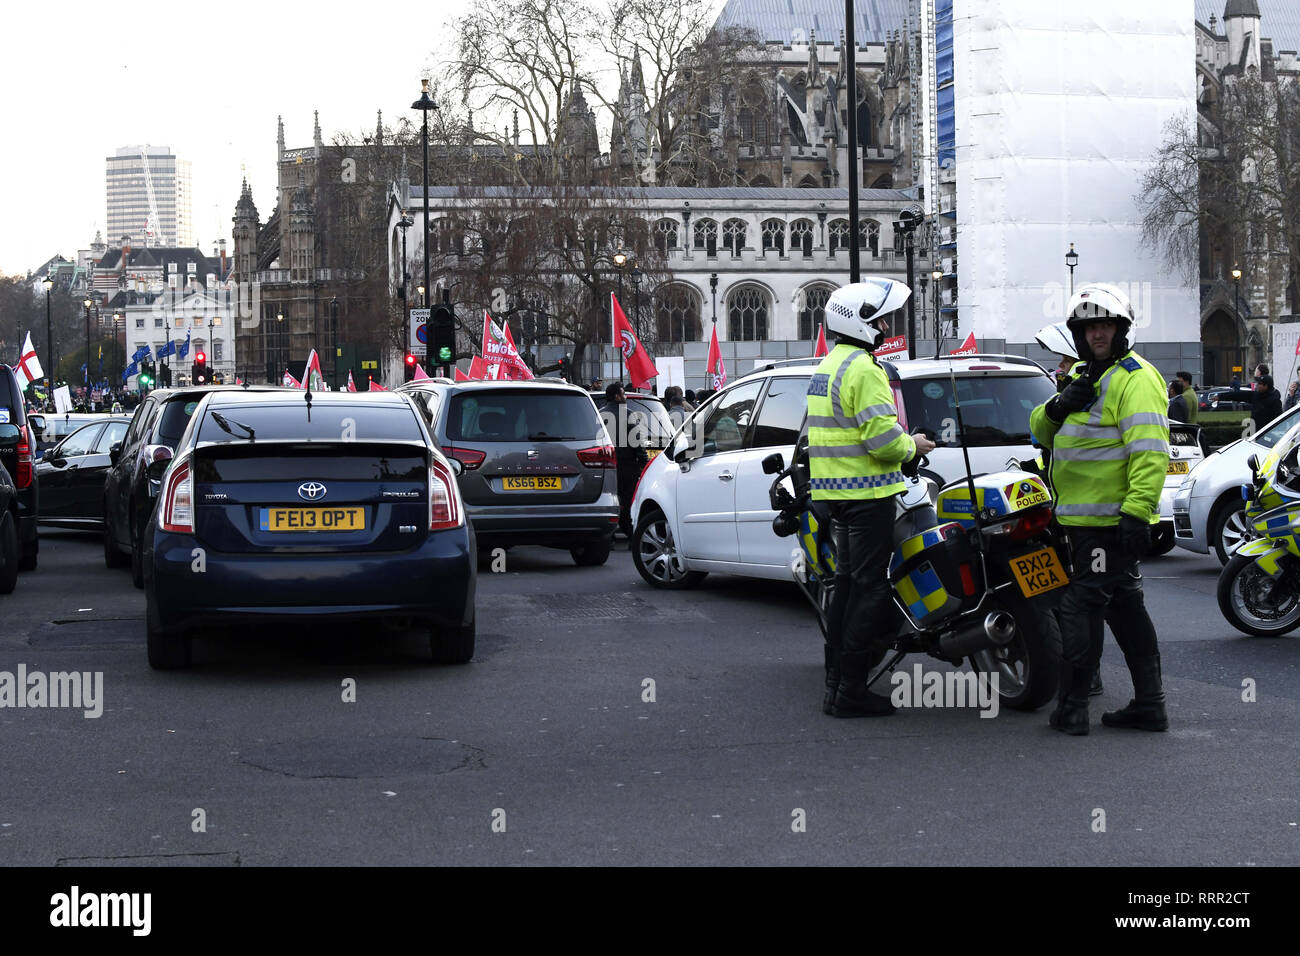 London, Greater London, UK. 25th Feb, 2019. Minicab drivers seen blocking the traffic during the rush-hour protest.Minicab drivers blocked Parliament Square in protest over changes to the congestion charge. Drivers are against congestion charges introduced by Mayor Sadiq Khan. TFL said the measure is necessary to reduce London's air pollution. Credit: Andres Pantoja/SOPA Images/ZUMA Wire/Alamy Live News Stock Photo